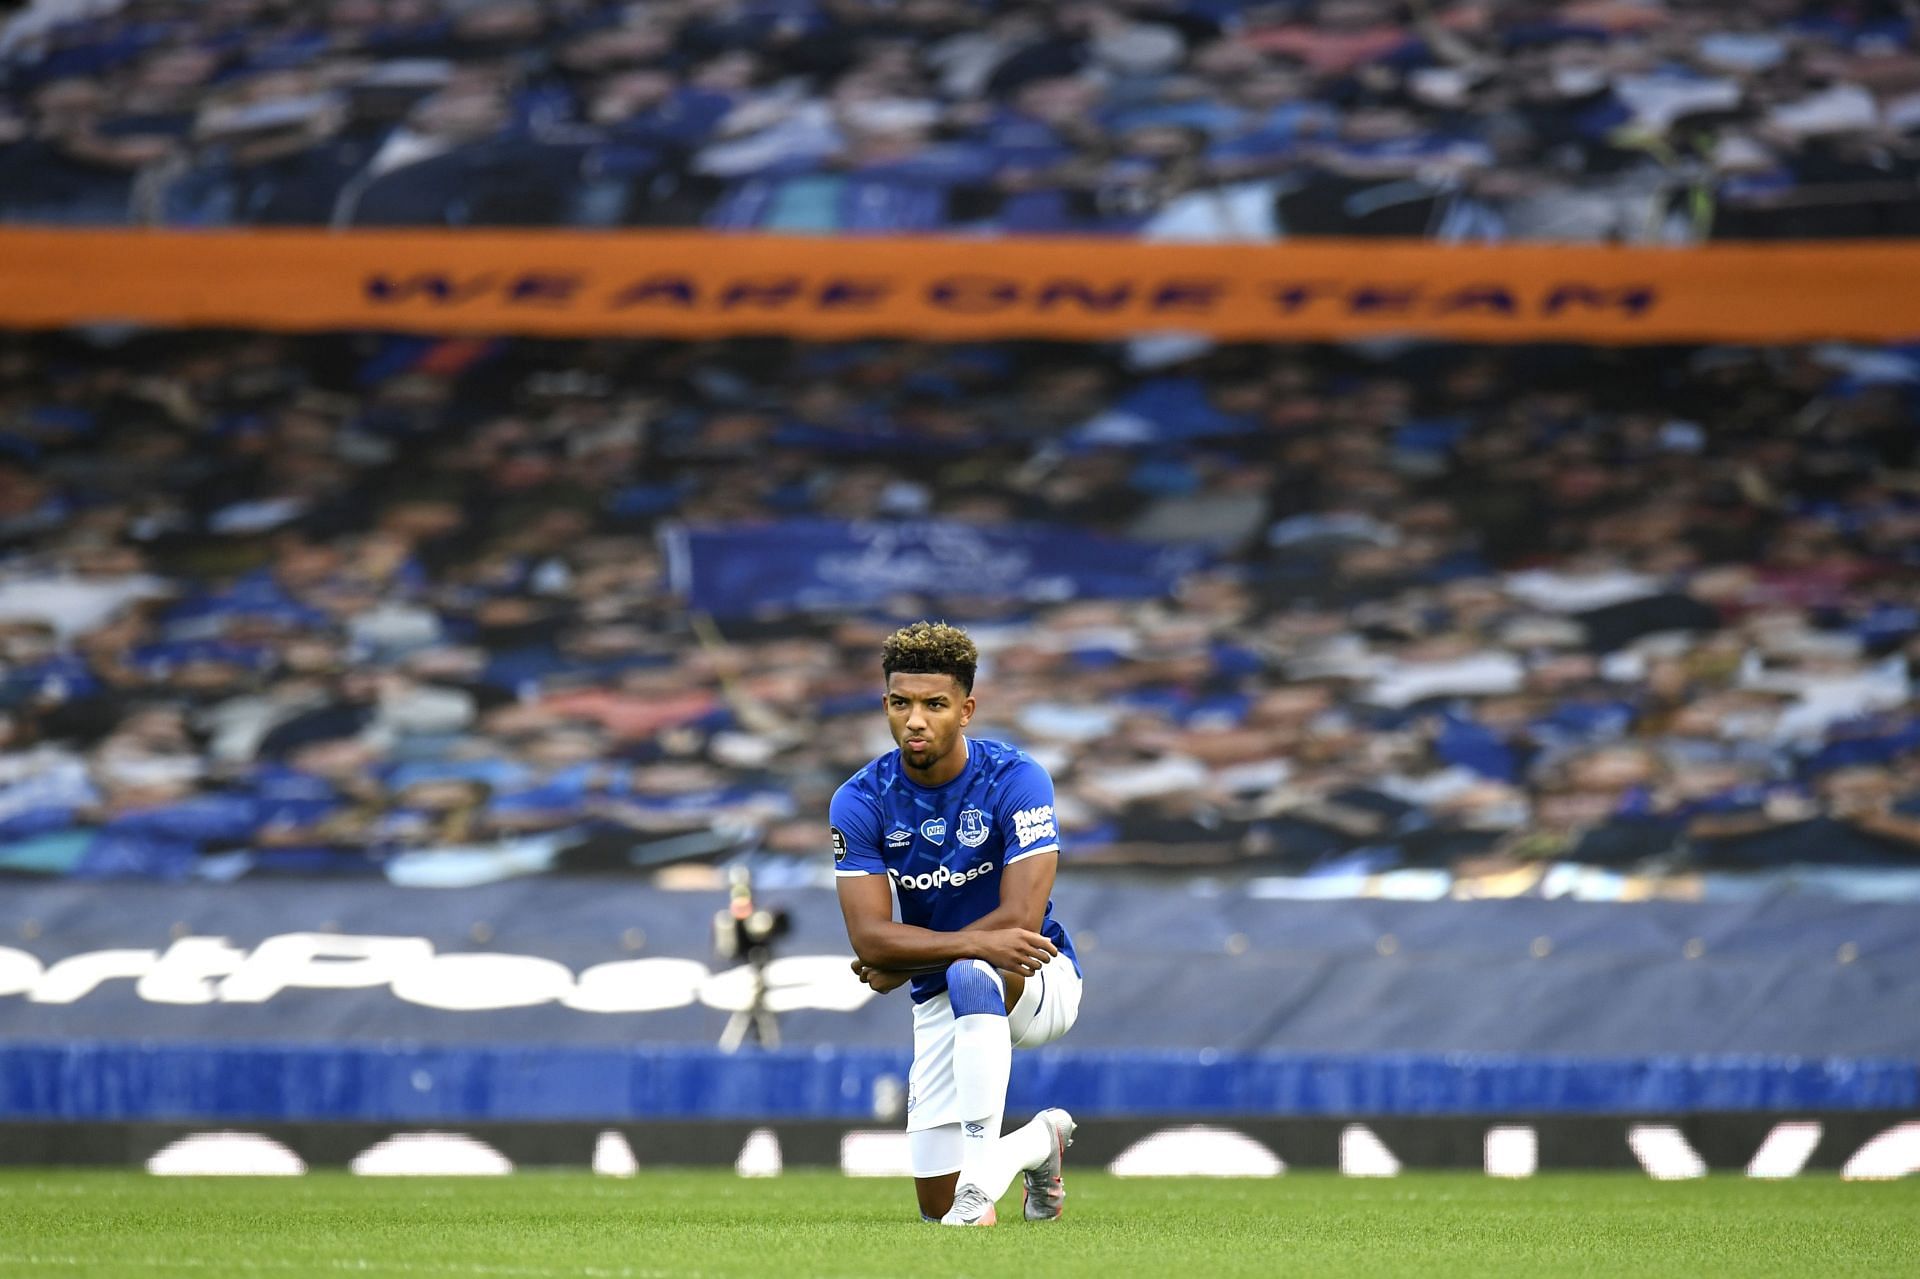 Holgate captured taking a knee as a gesture against Racism in a Premier League match